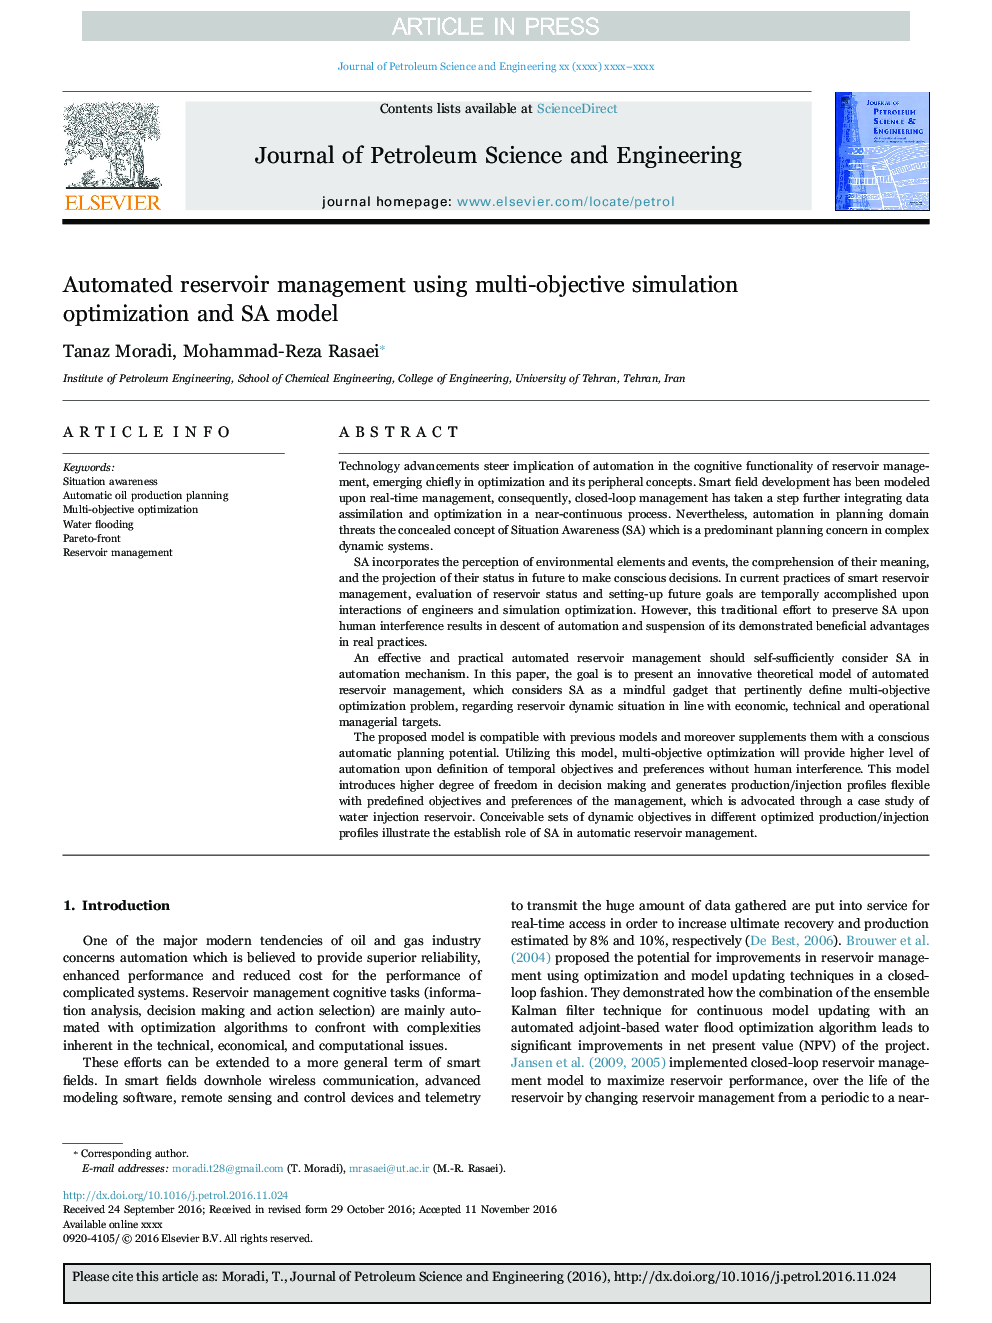 Automated reservoir management using multi-objective simulation optimization and SA model